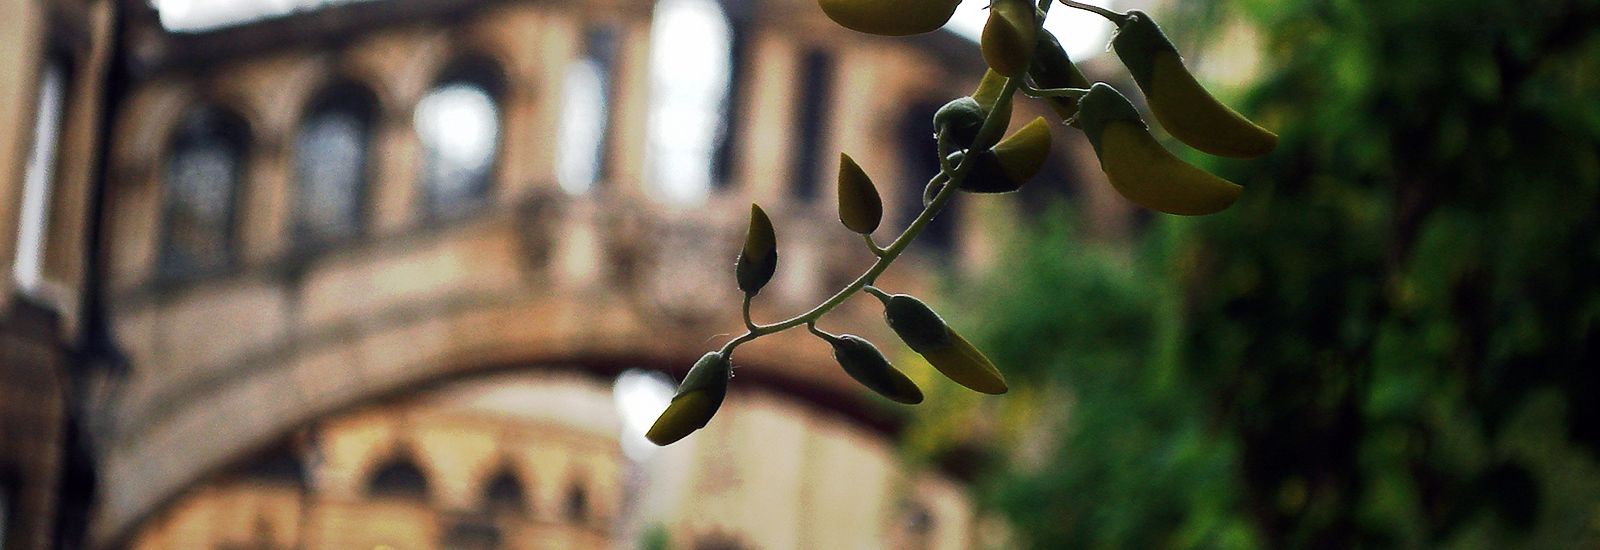 Close up of a plant in front of the Bridge of Sighs